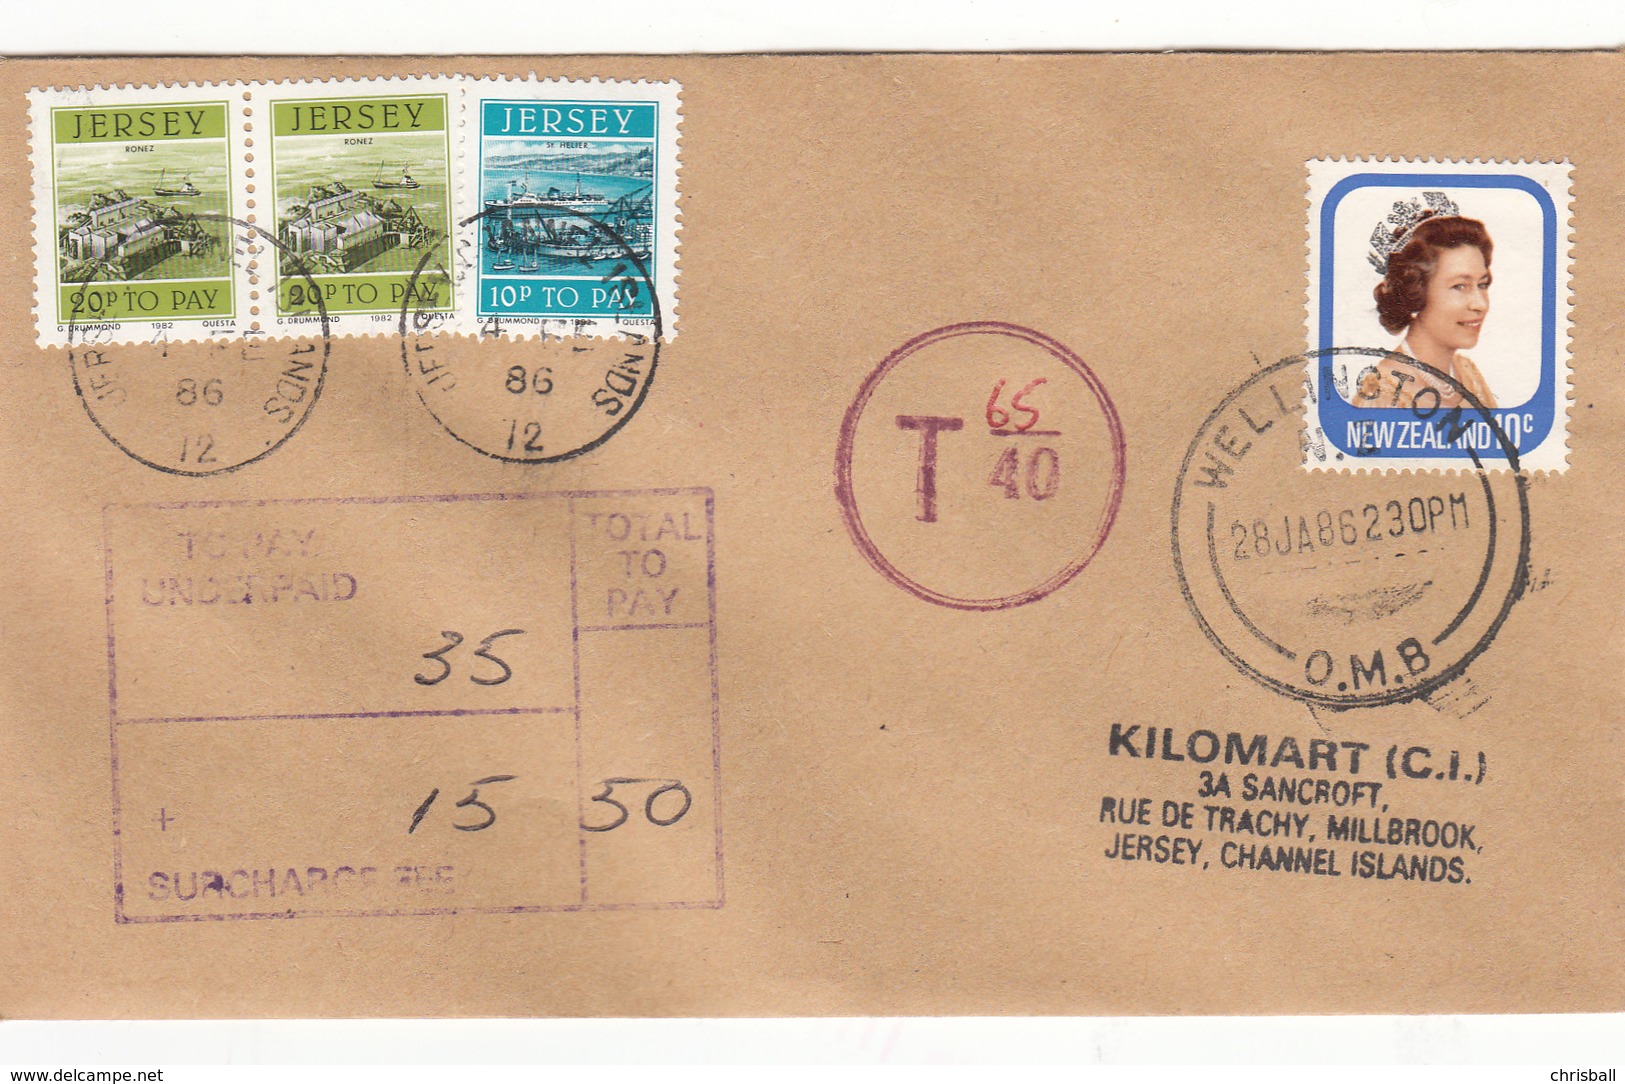 New Zealand Pictorial Used On Underpaid Cover To Jersey With Postage Due 2 X 20p + 10p - Segnatasse